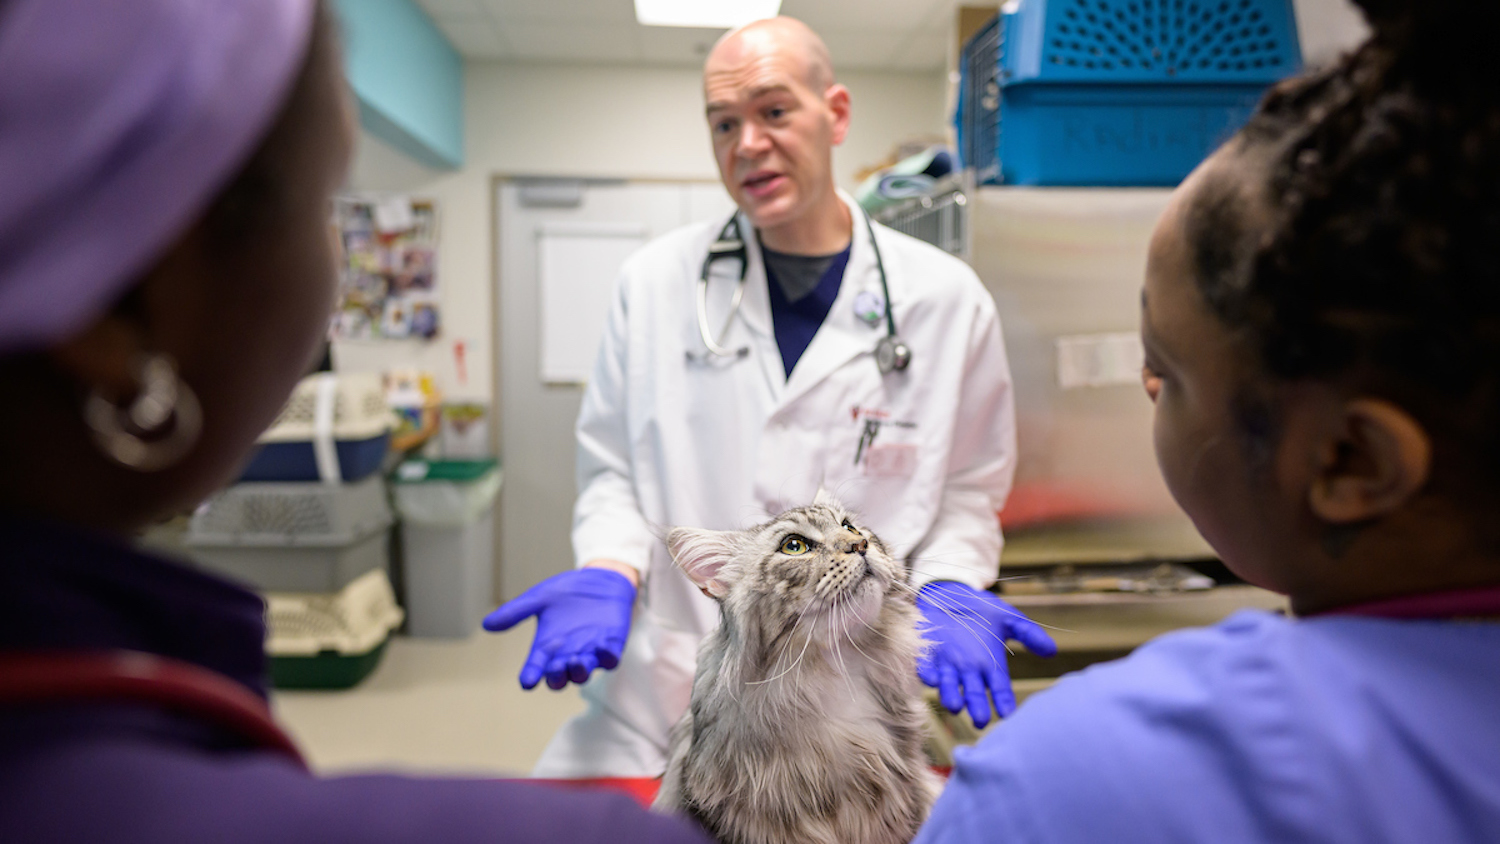 Dr. Mike Nolan shares his evaluation of Smokey Bear Russell, a 1.5-year-old Maine Coon cat, with Savannah S. Simon, a second-year veterinary student at Tuskegee University in Alabama, and Briana Horne-Reid, a second-year DVM student at NC State.